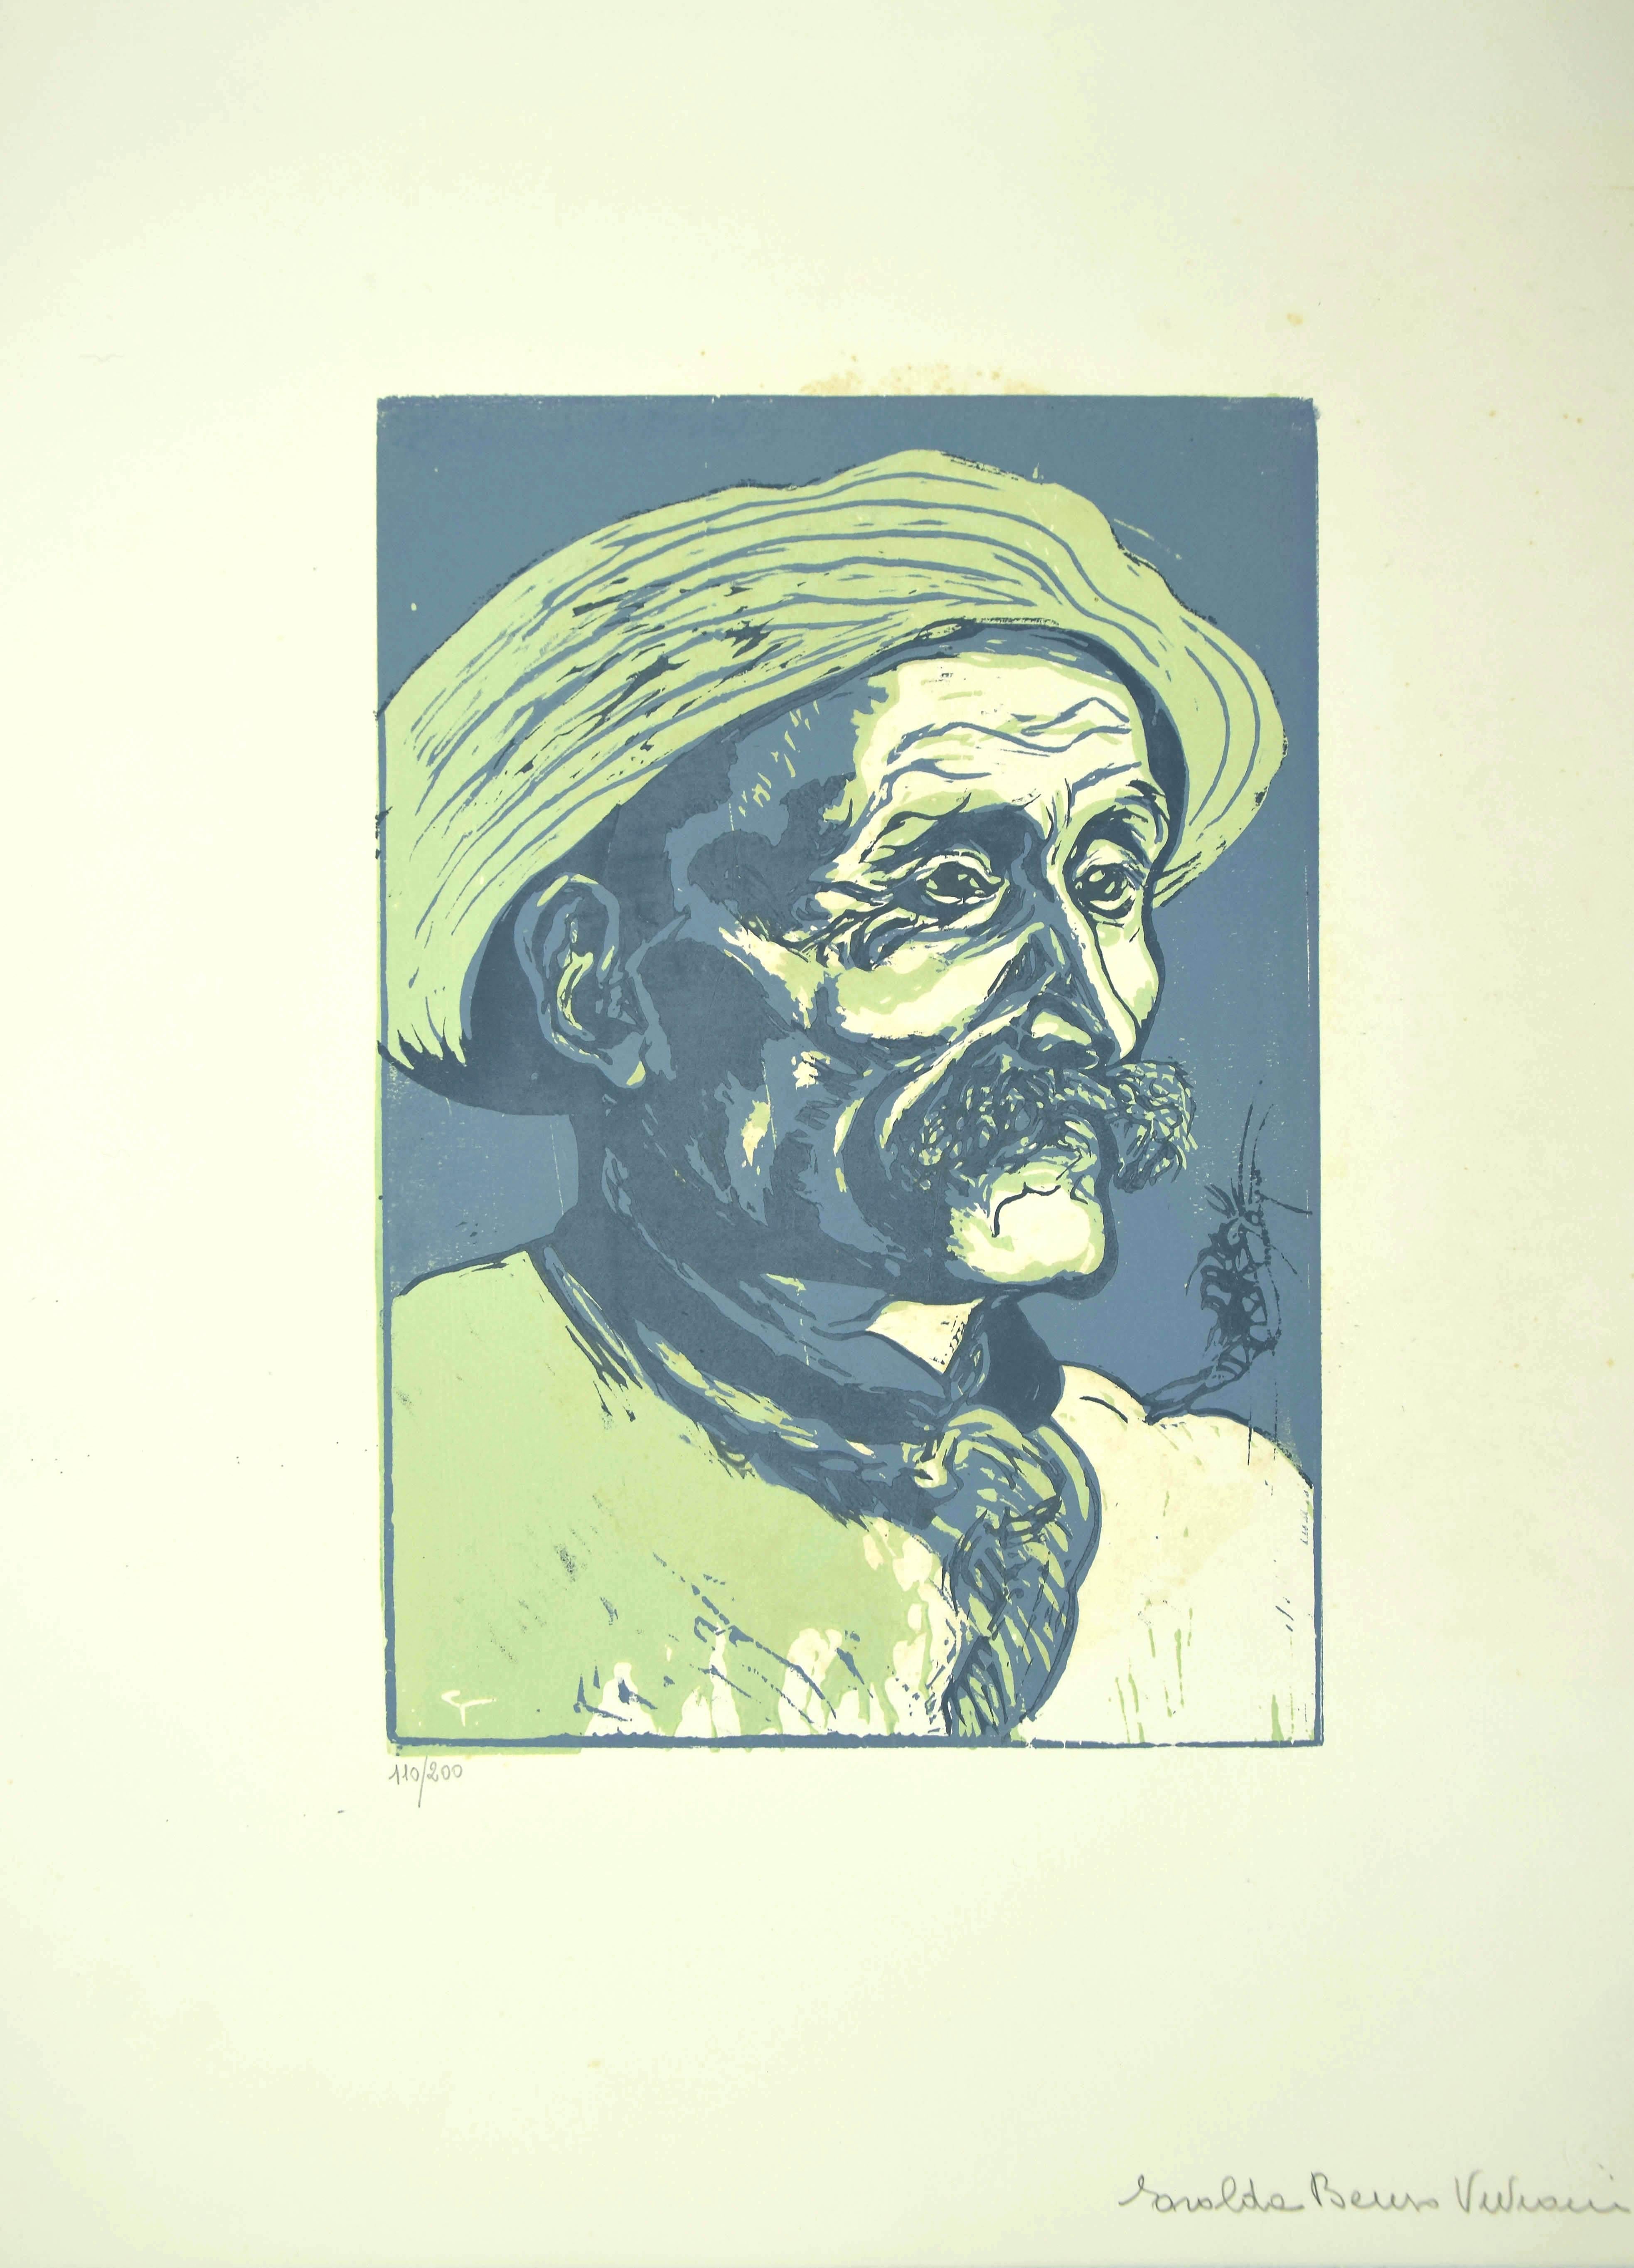 Portrait of Old Man is an original woodcut realized by Giuseppe Viviani in 1927.

Image dimensions:  38.5 x 27 cm.

Hand-signed in pencil on the lower right, and numbered in pencil on the lower-left by Viviani's wife.

This is a color woodcut on